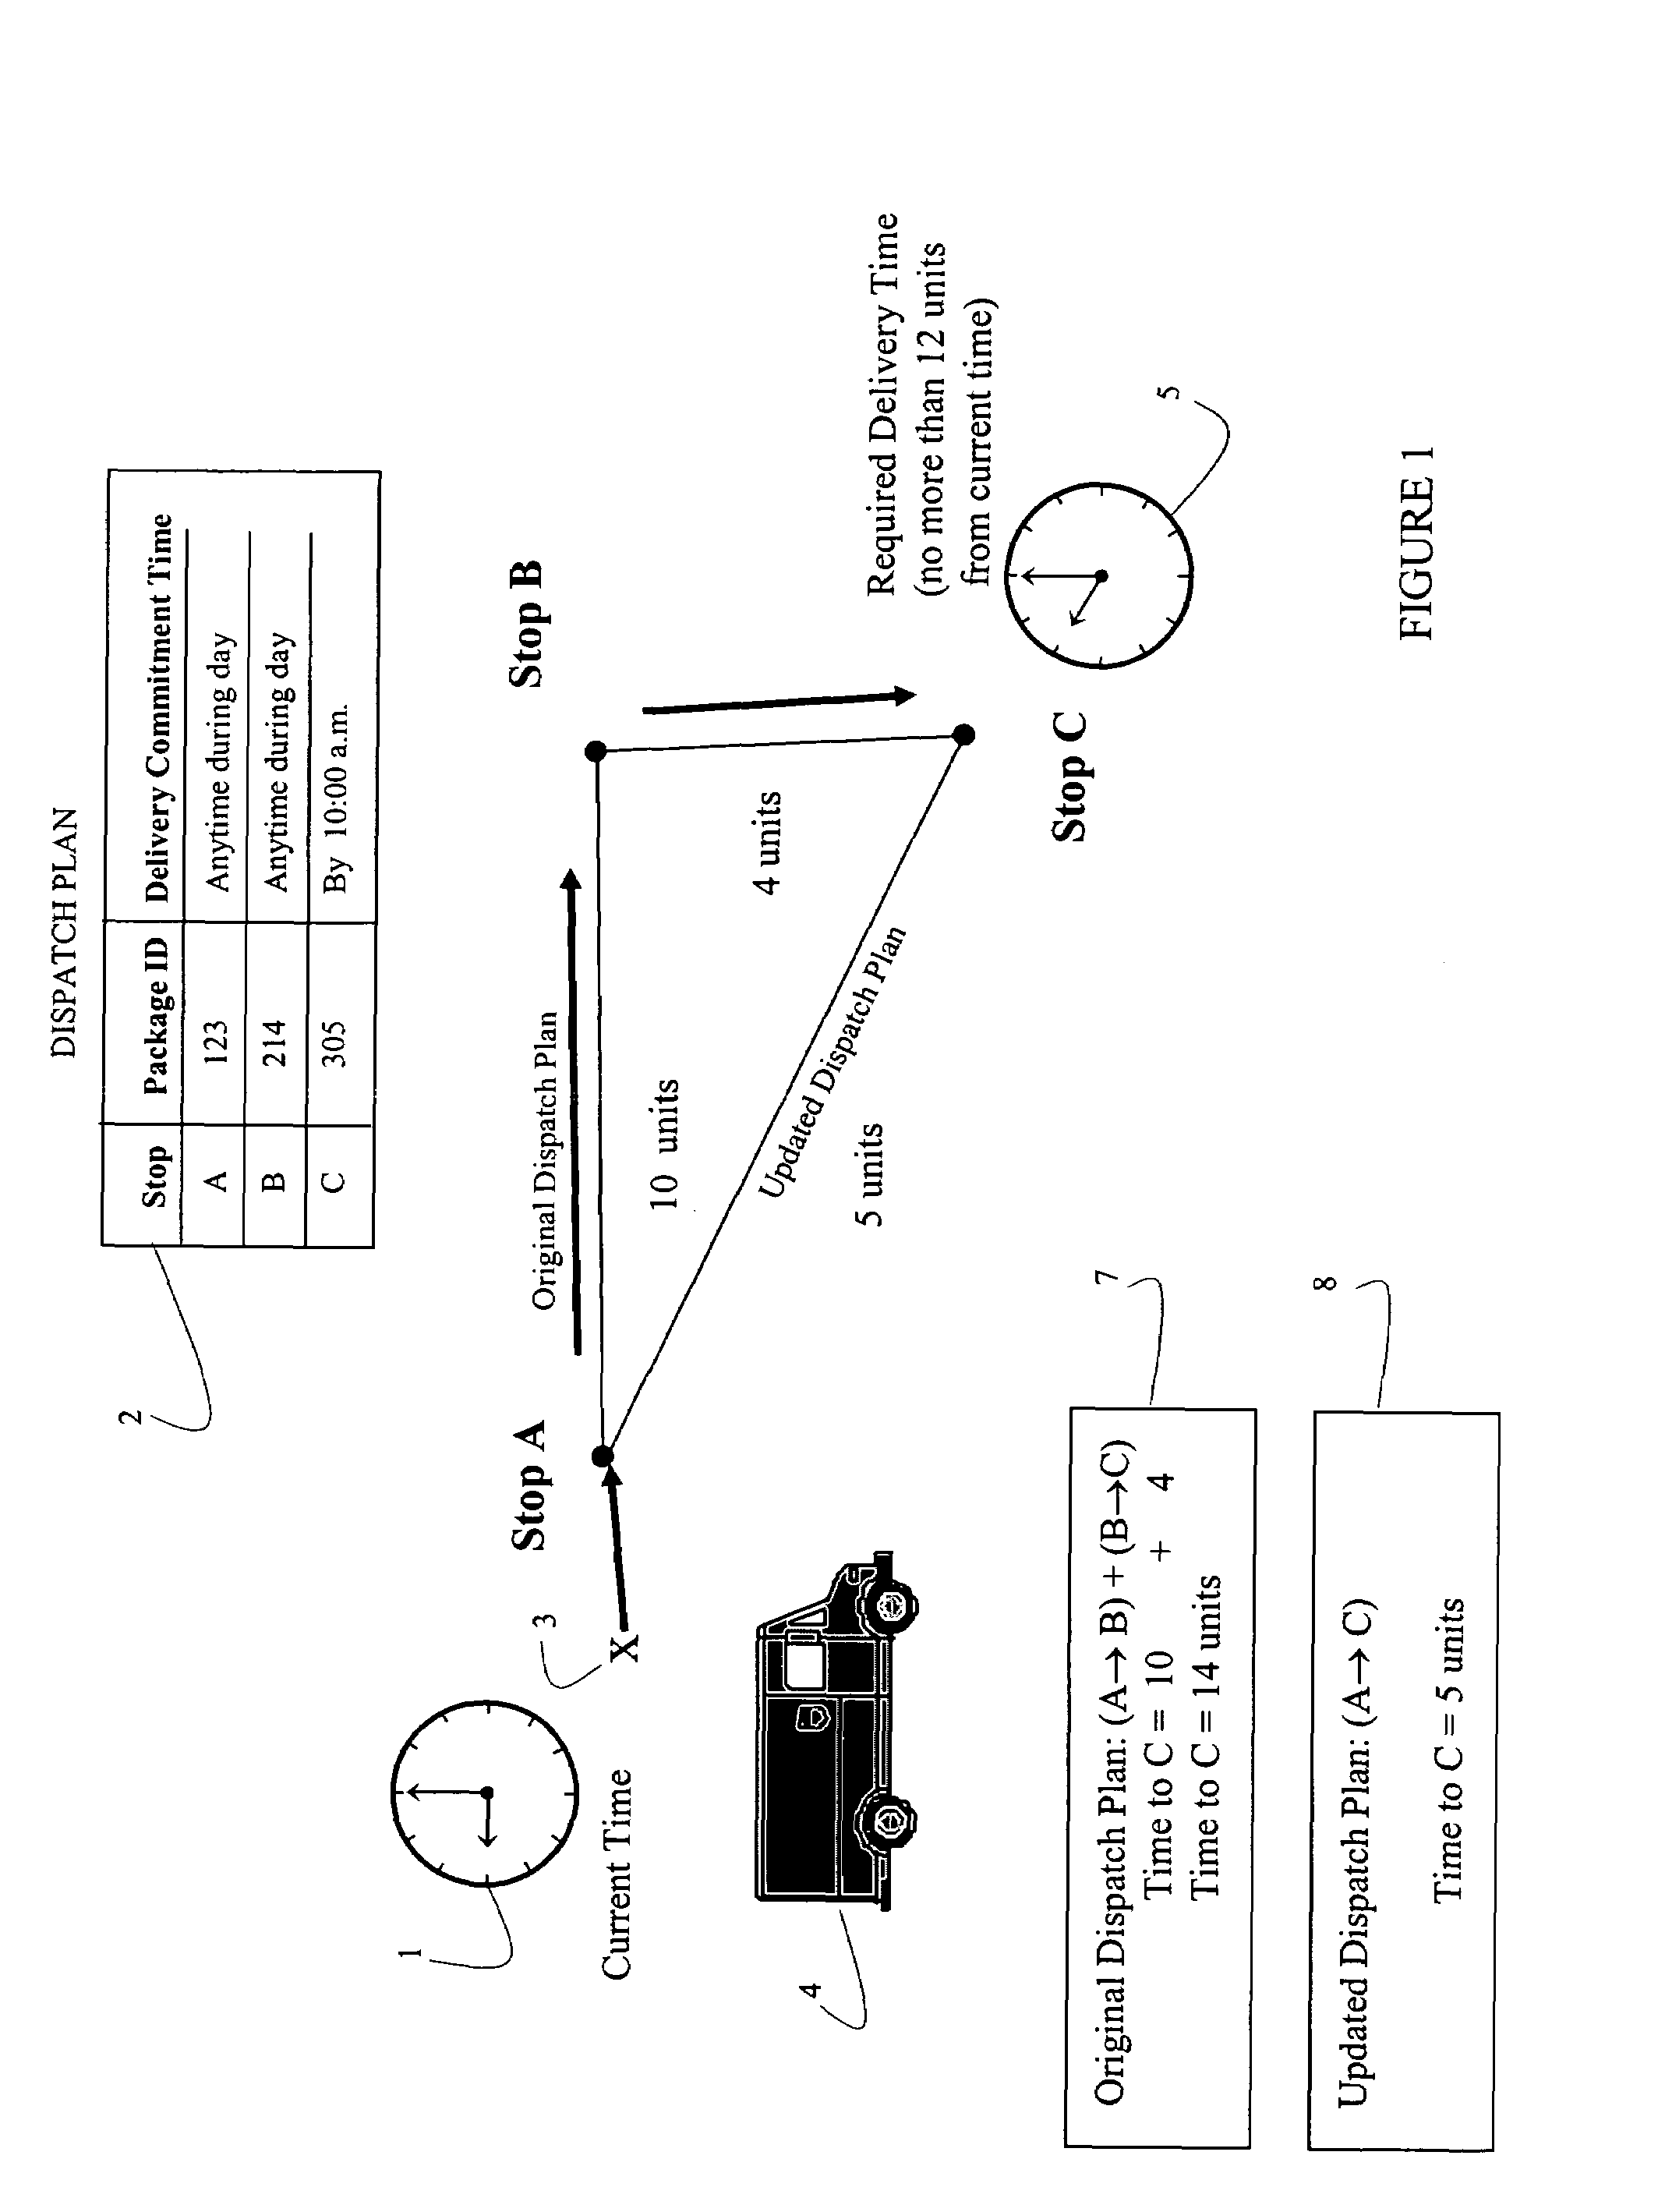 Systems and methods for dynamically updating a dispatch plan